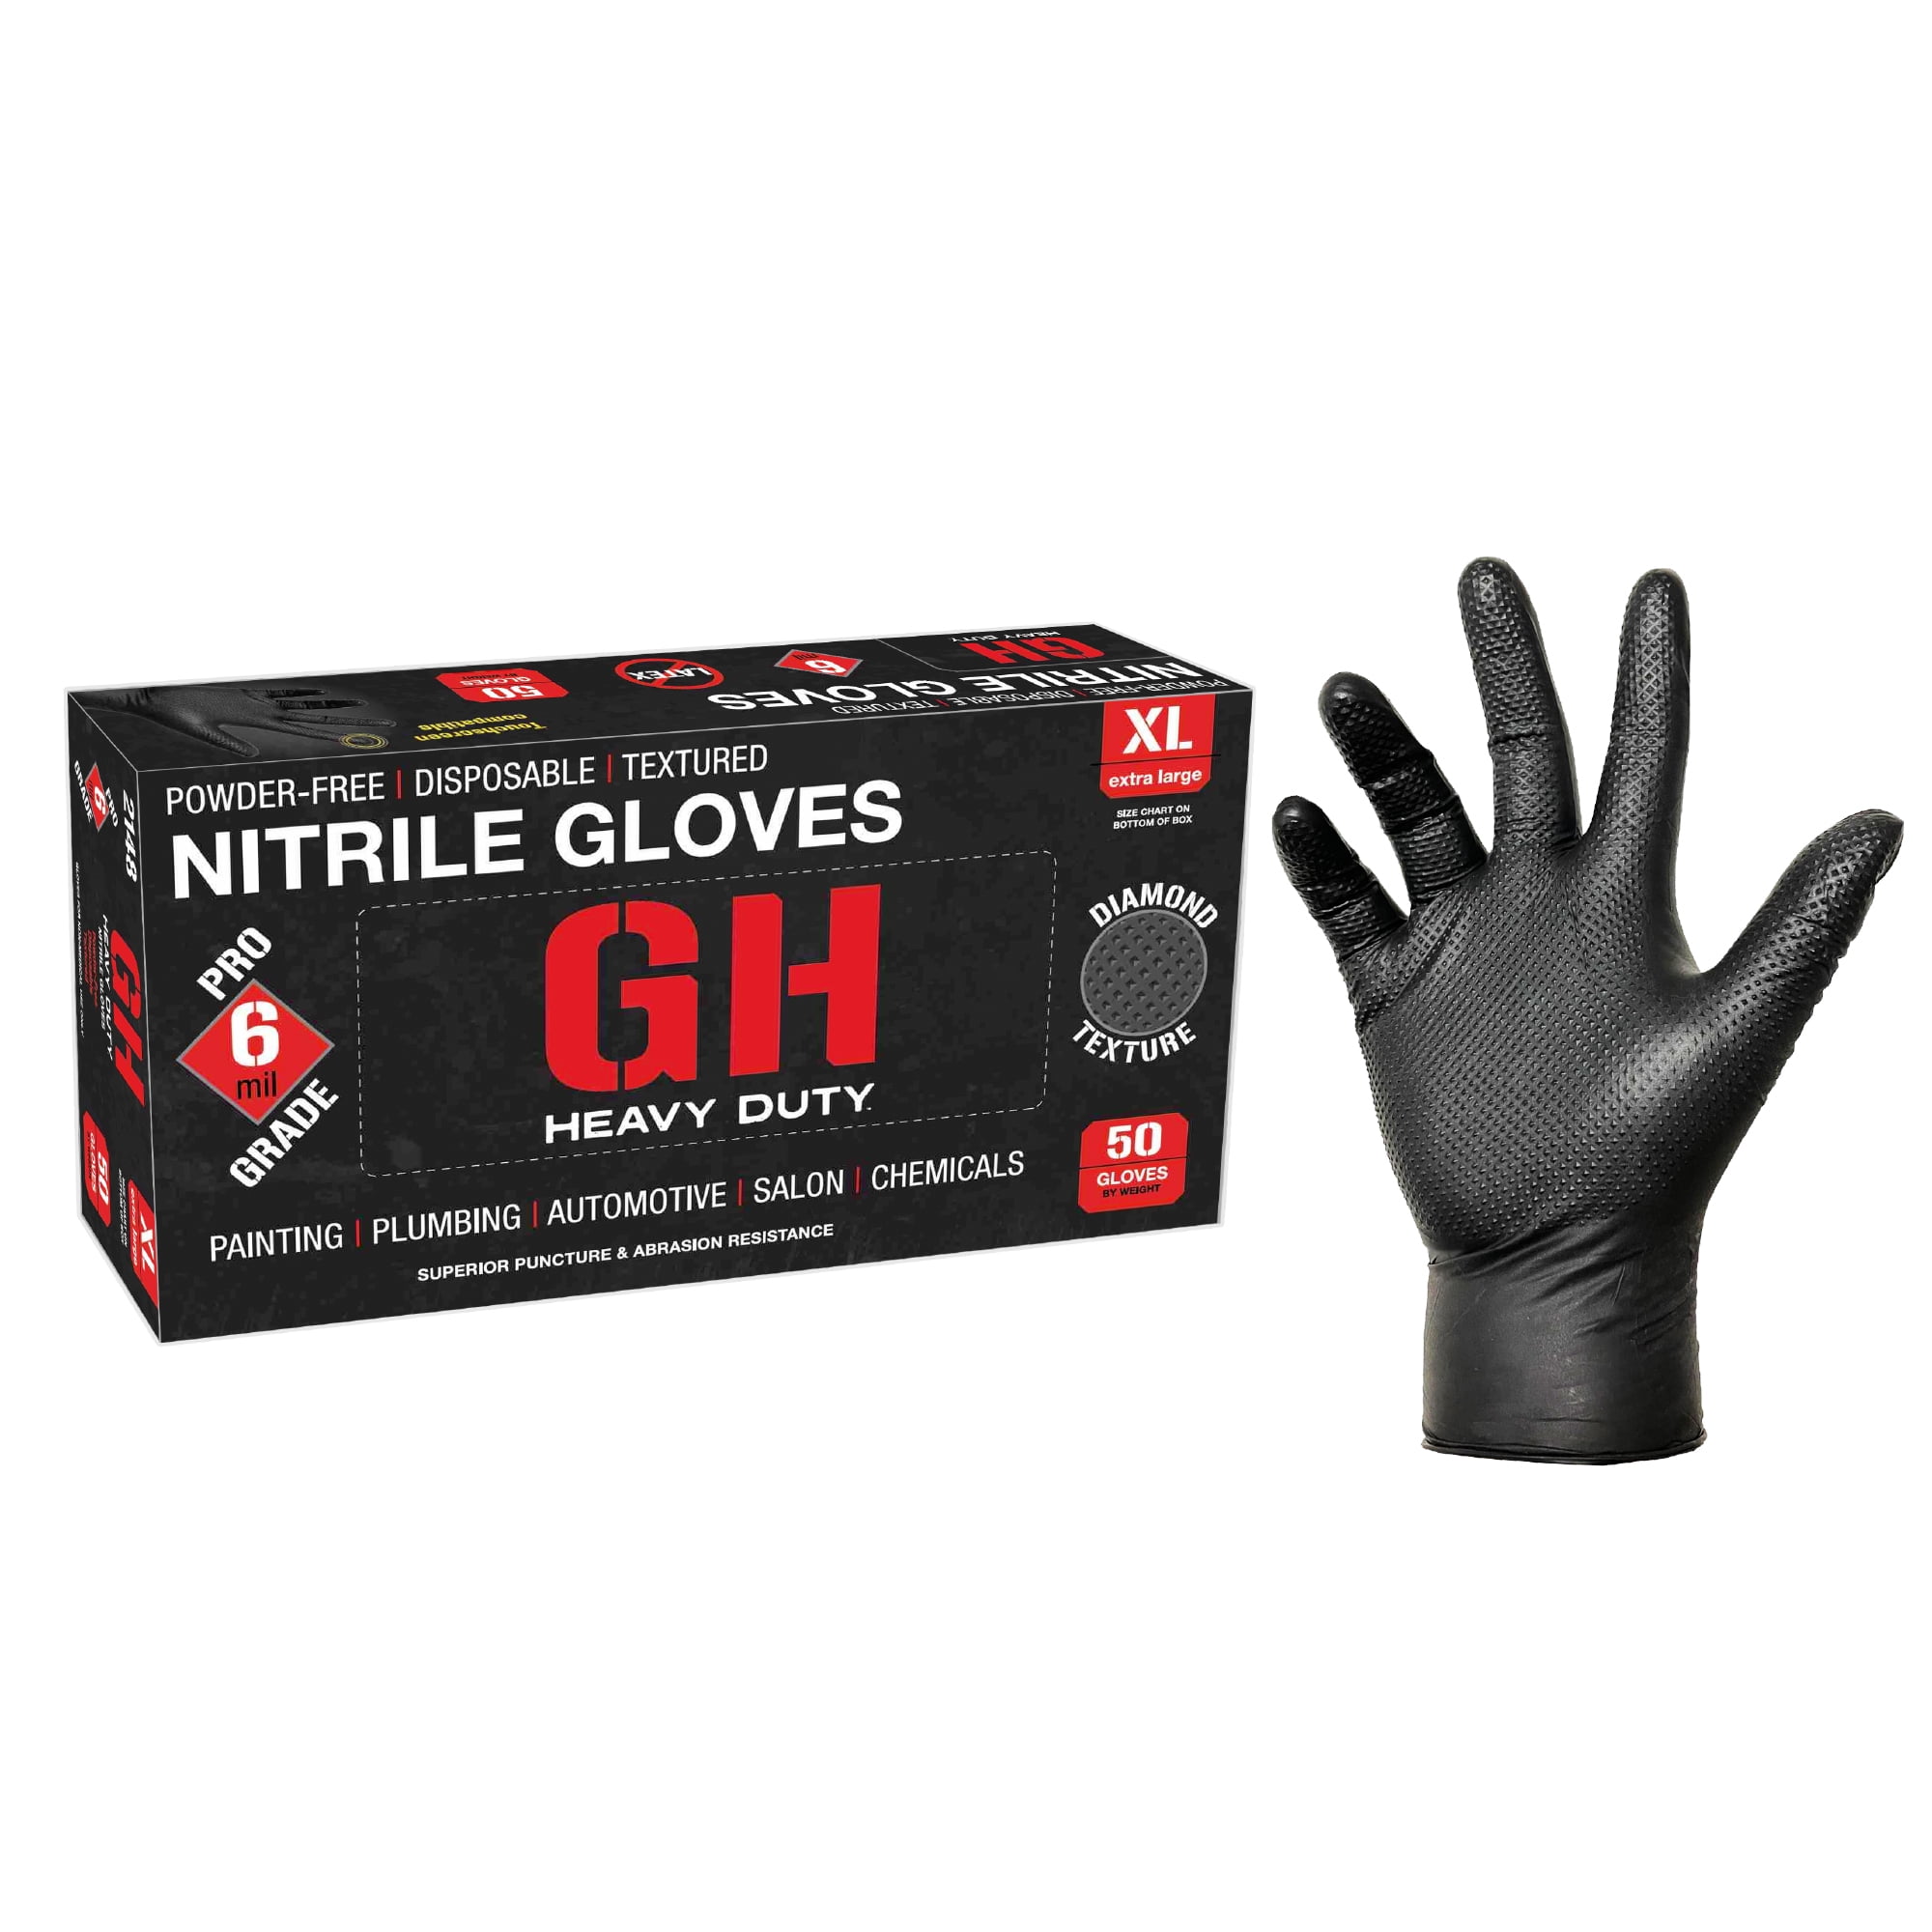 Dura-Gold HD Black Nitrile Disposable Gloves, Box of 100, Size X-Large, 6  Mil - Latex Free, Powder Free, Textured Grip 1 X-Large (Pcak of 100)